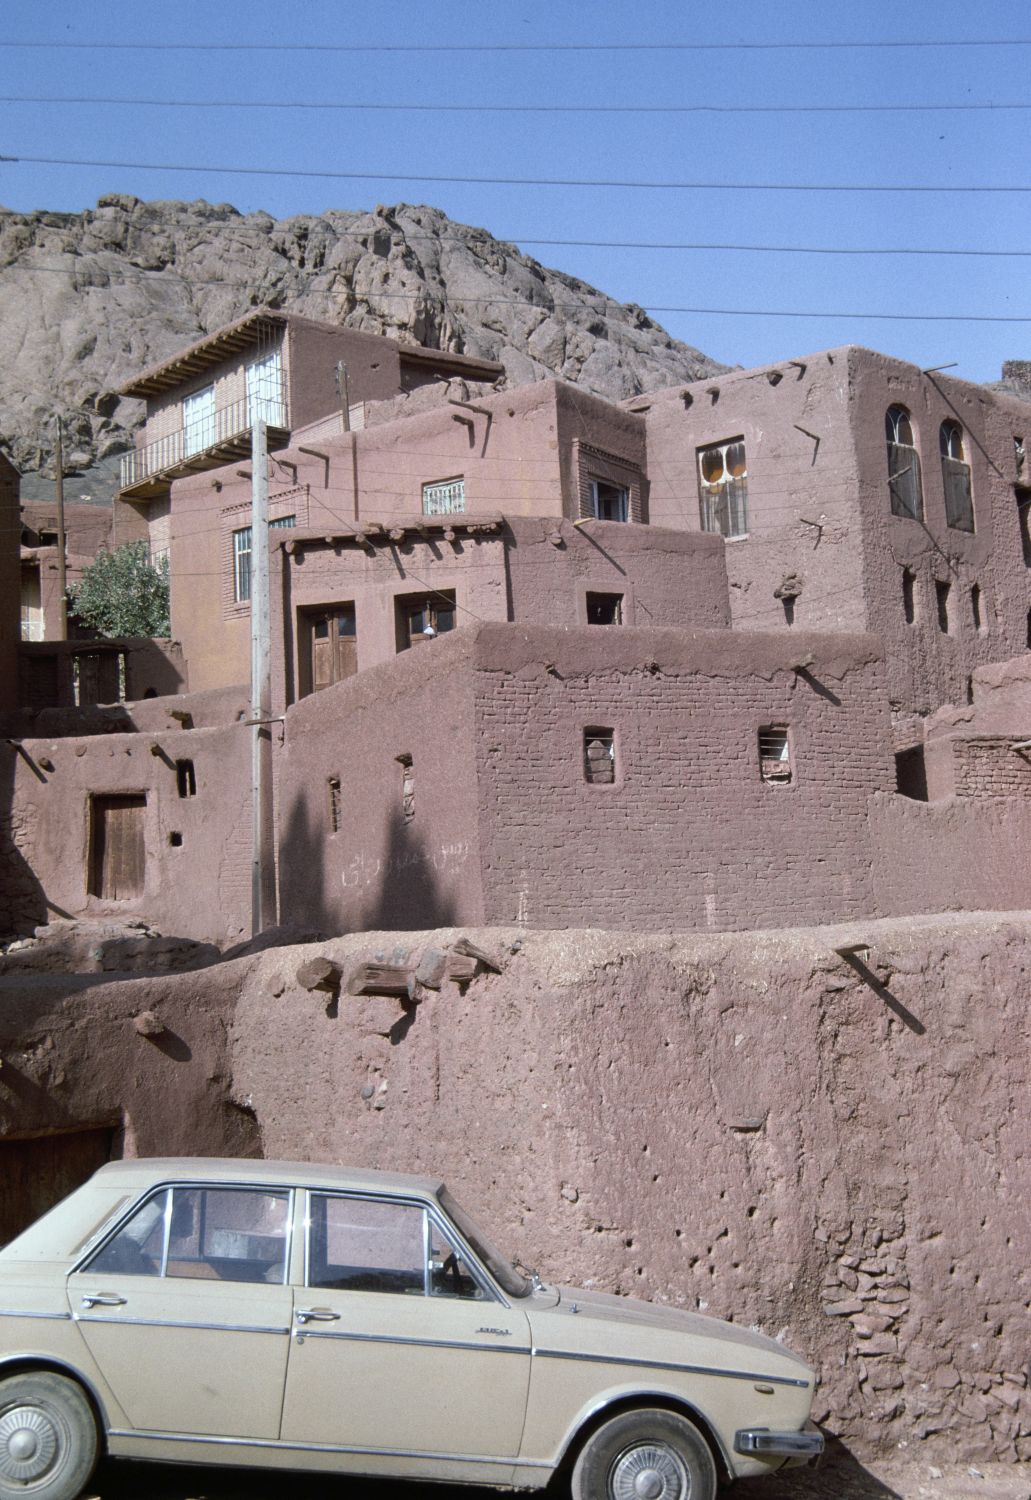 View of houses in Abyanah, Iran.